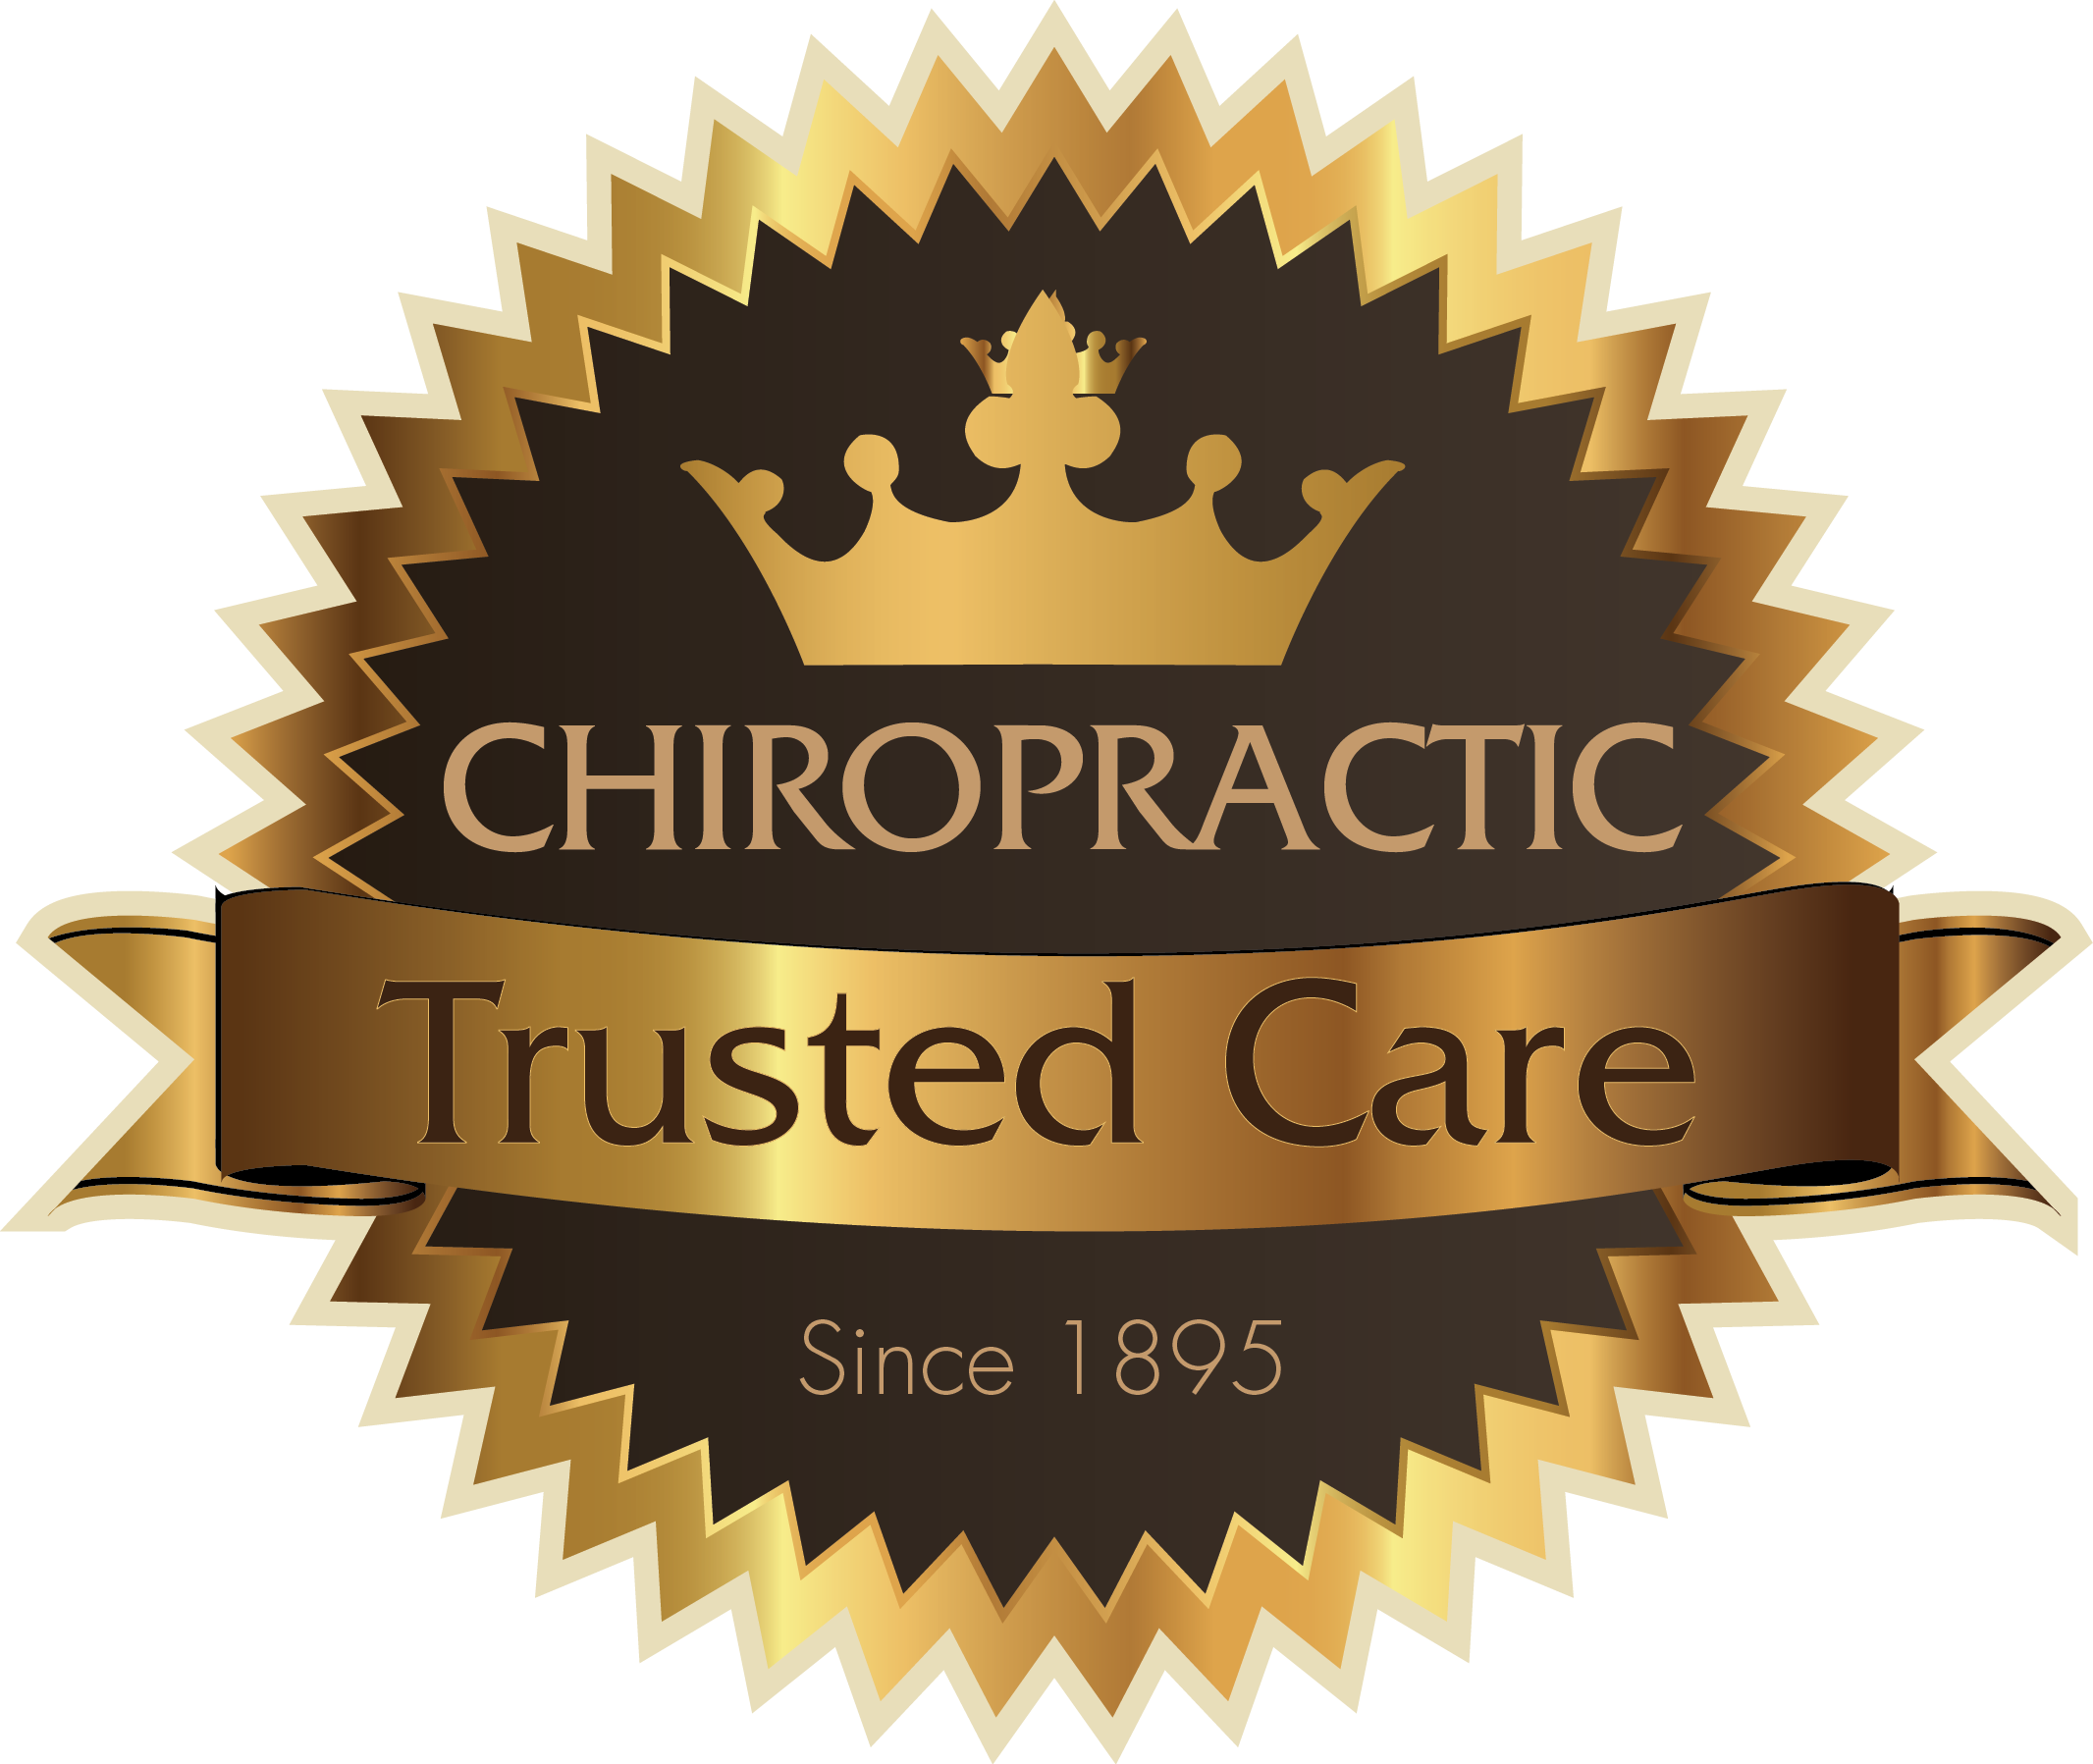 Celebrate Chiropractic Since 1895